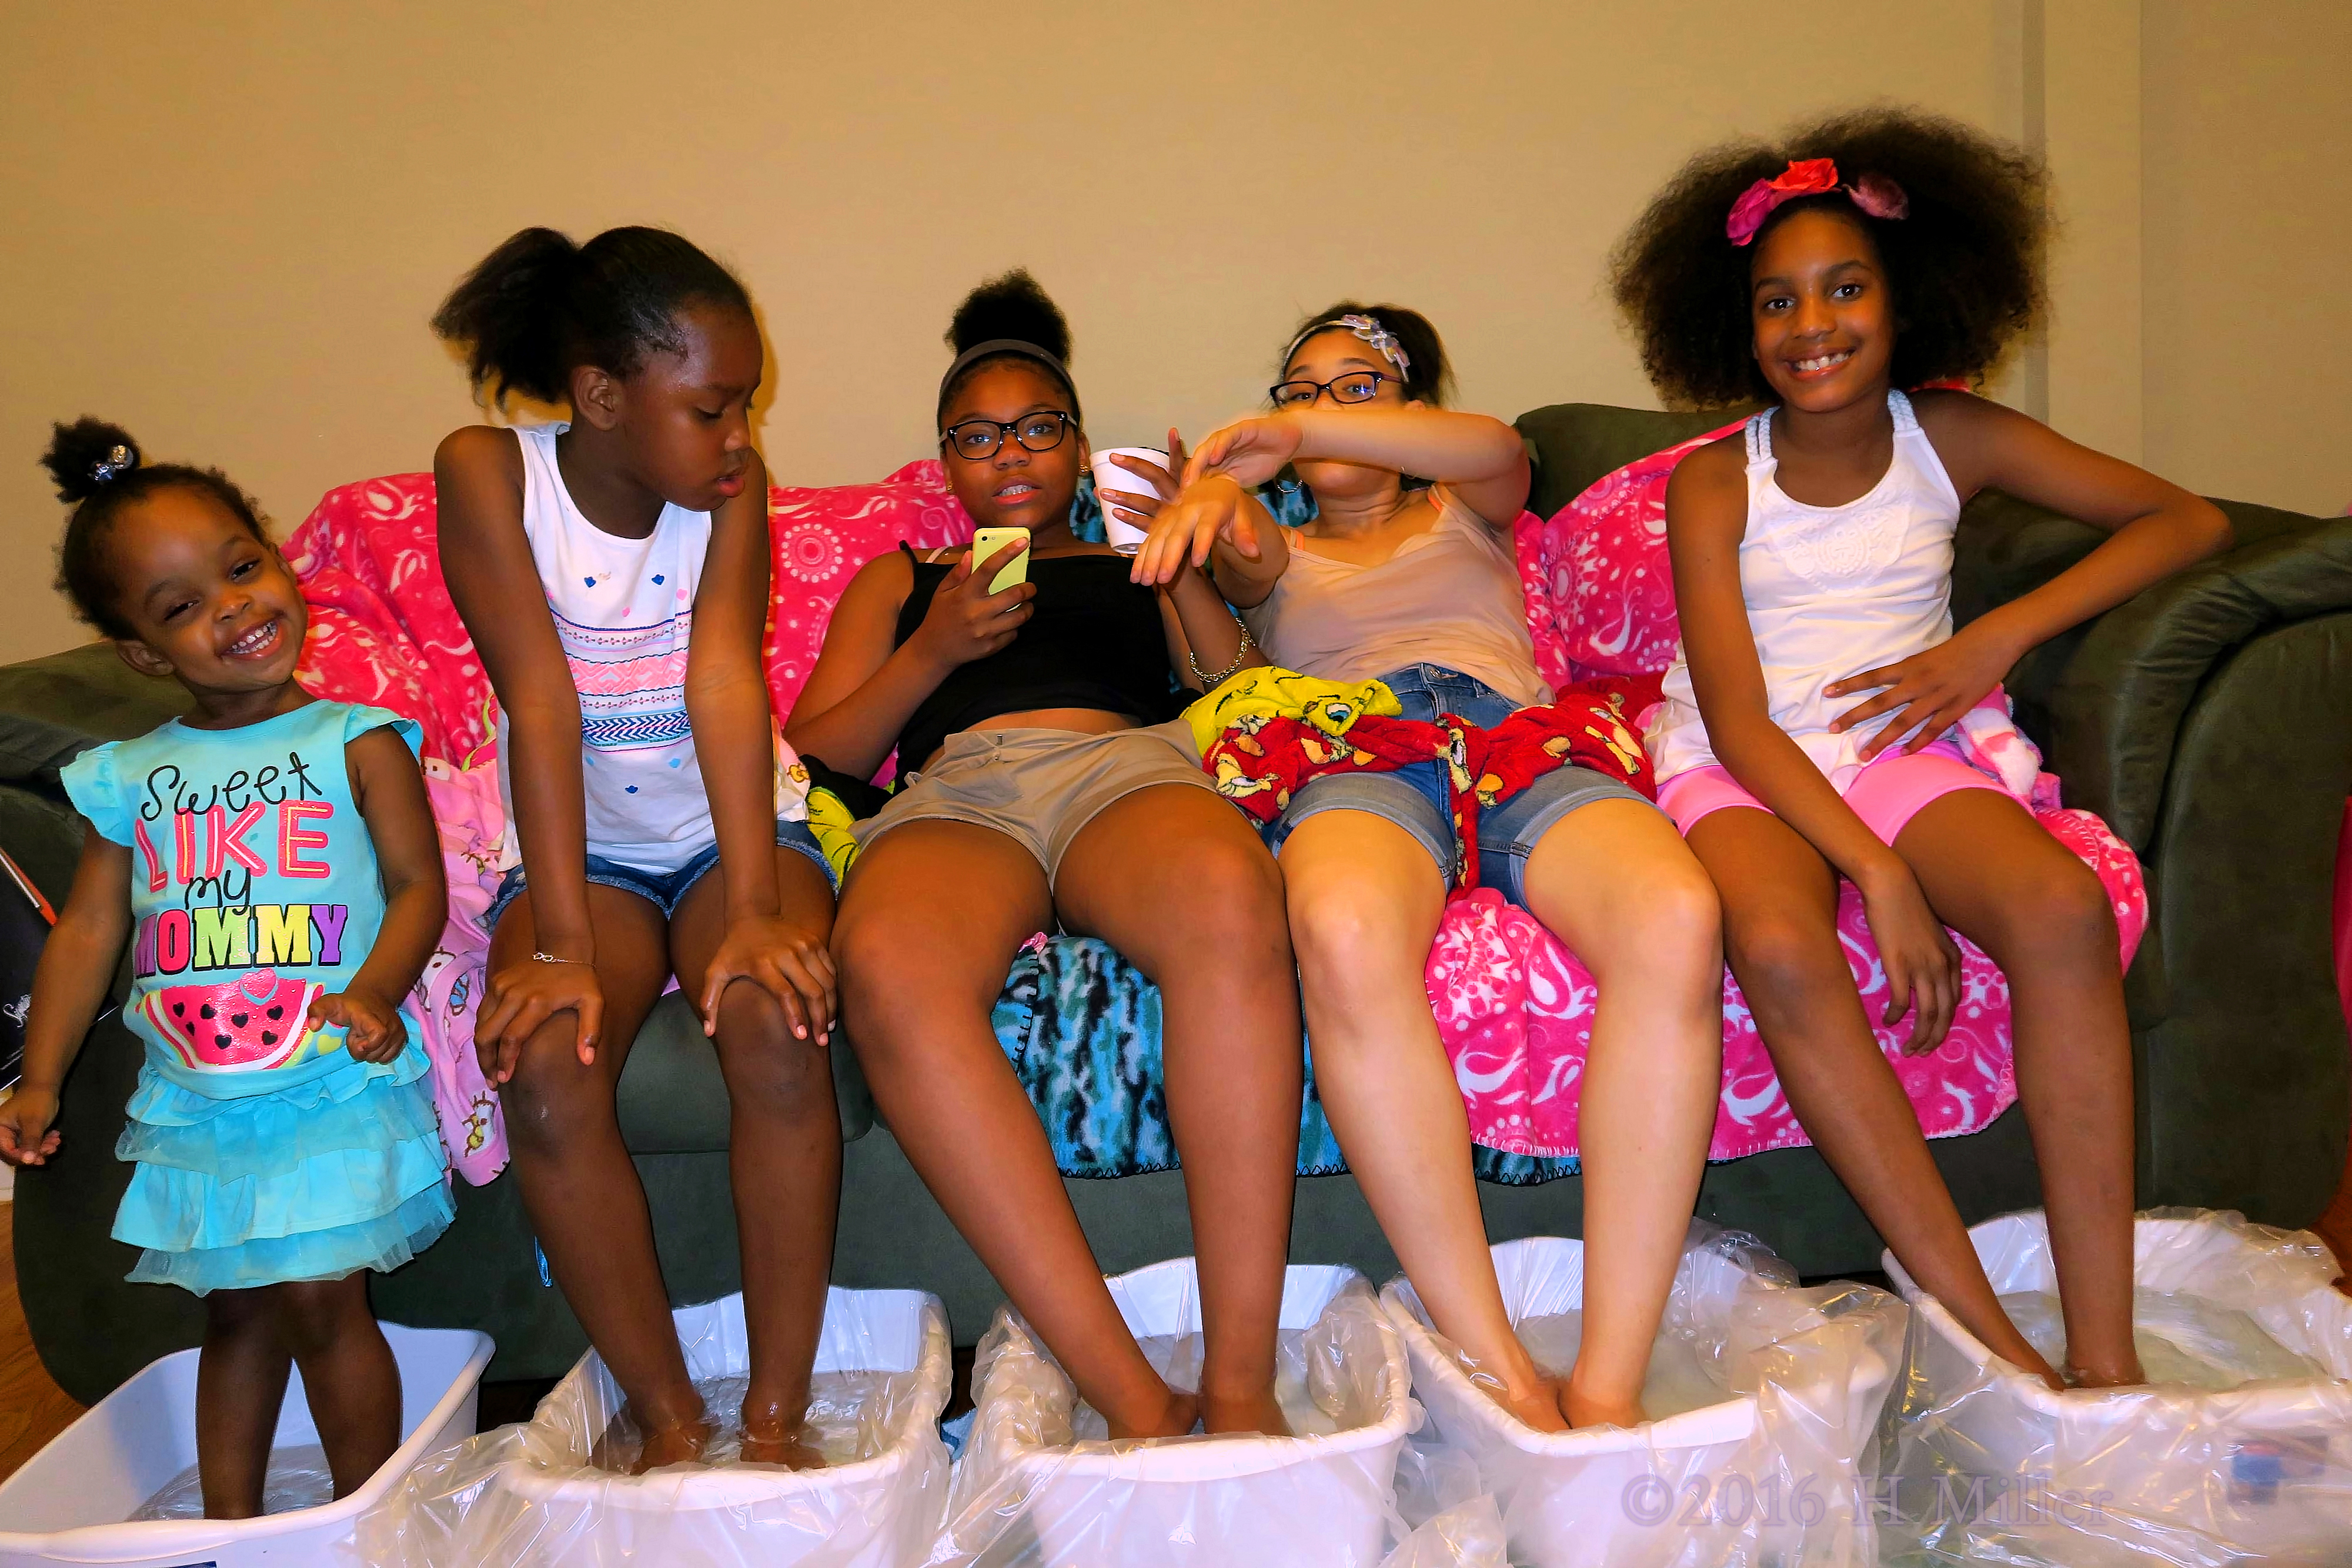 Everybody Is Hanging Out Together During Their Kids Pedicures At The Girls Spa Birthday. 